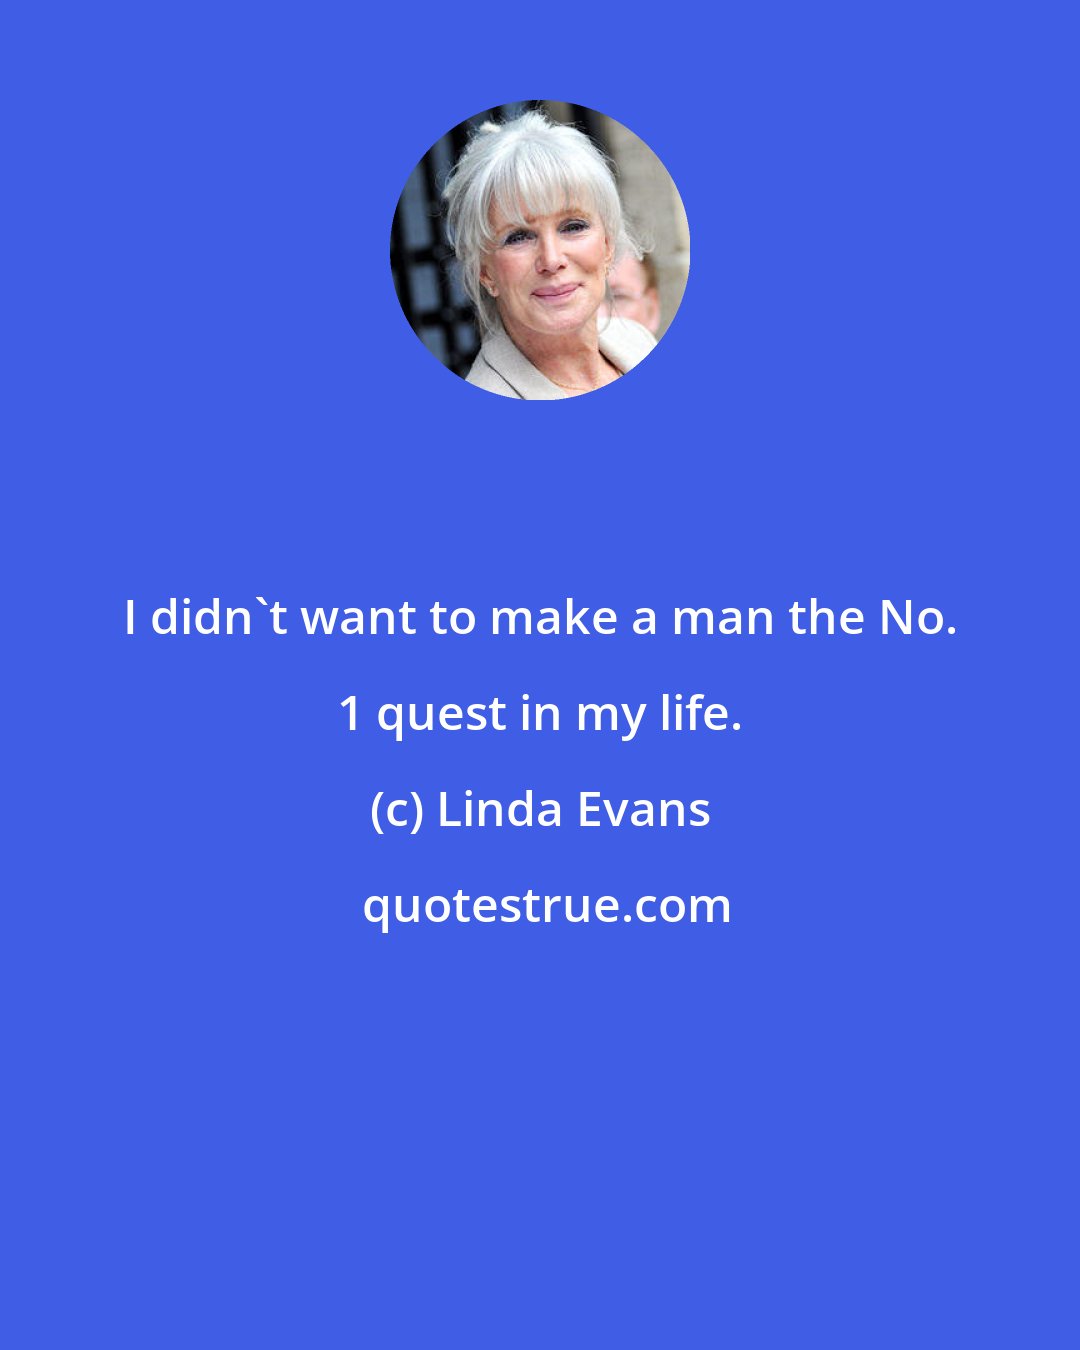 Linda Evans: I didn't want to make a man the No. 1 quest in my life.